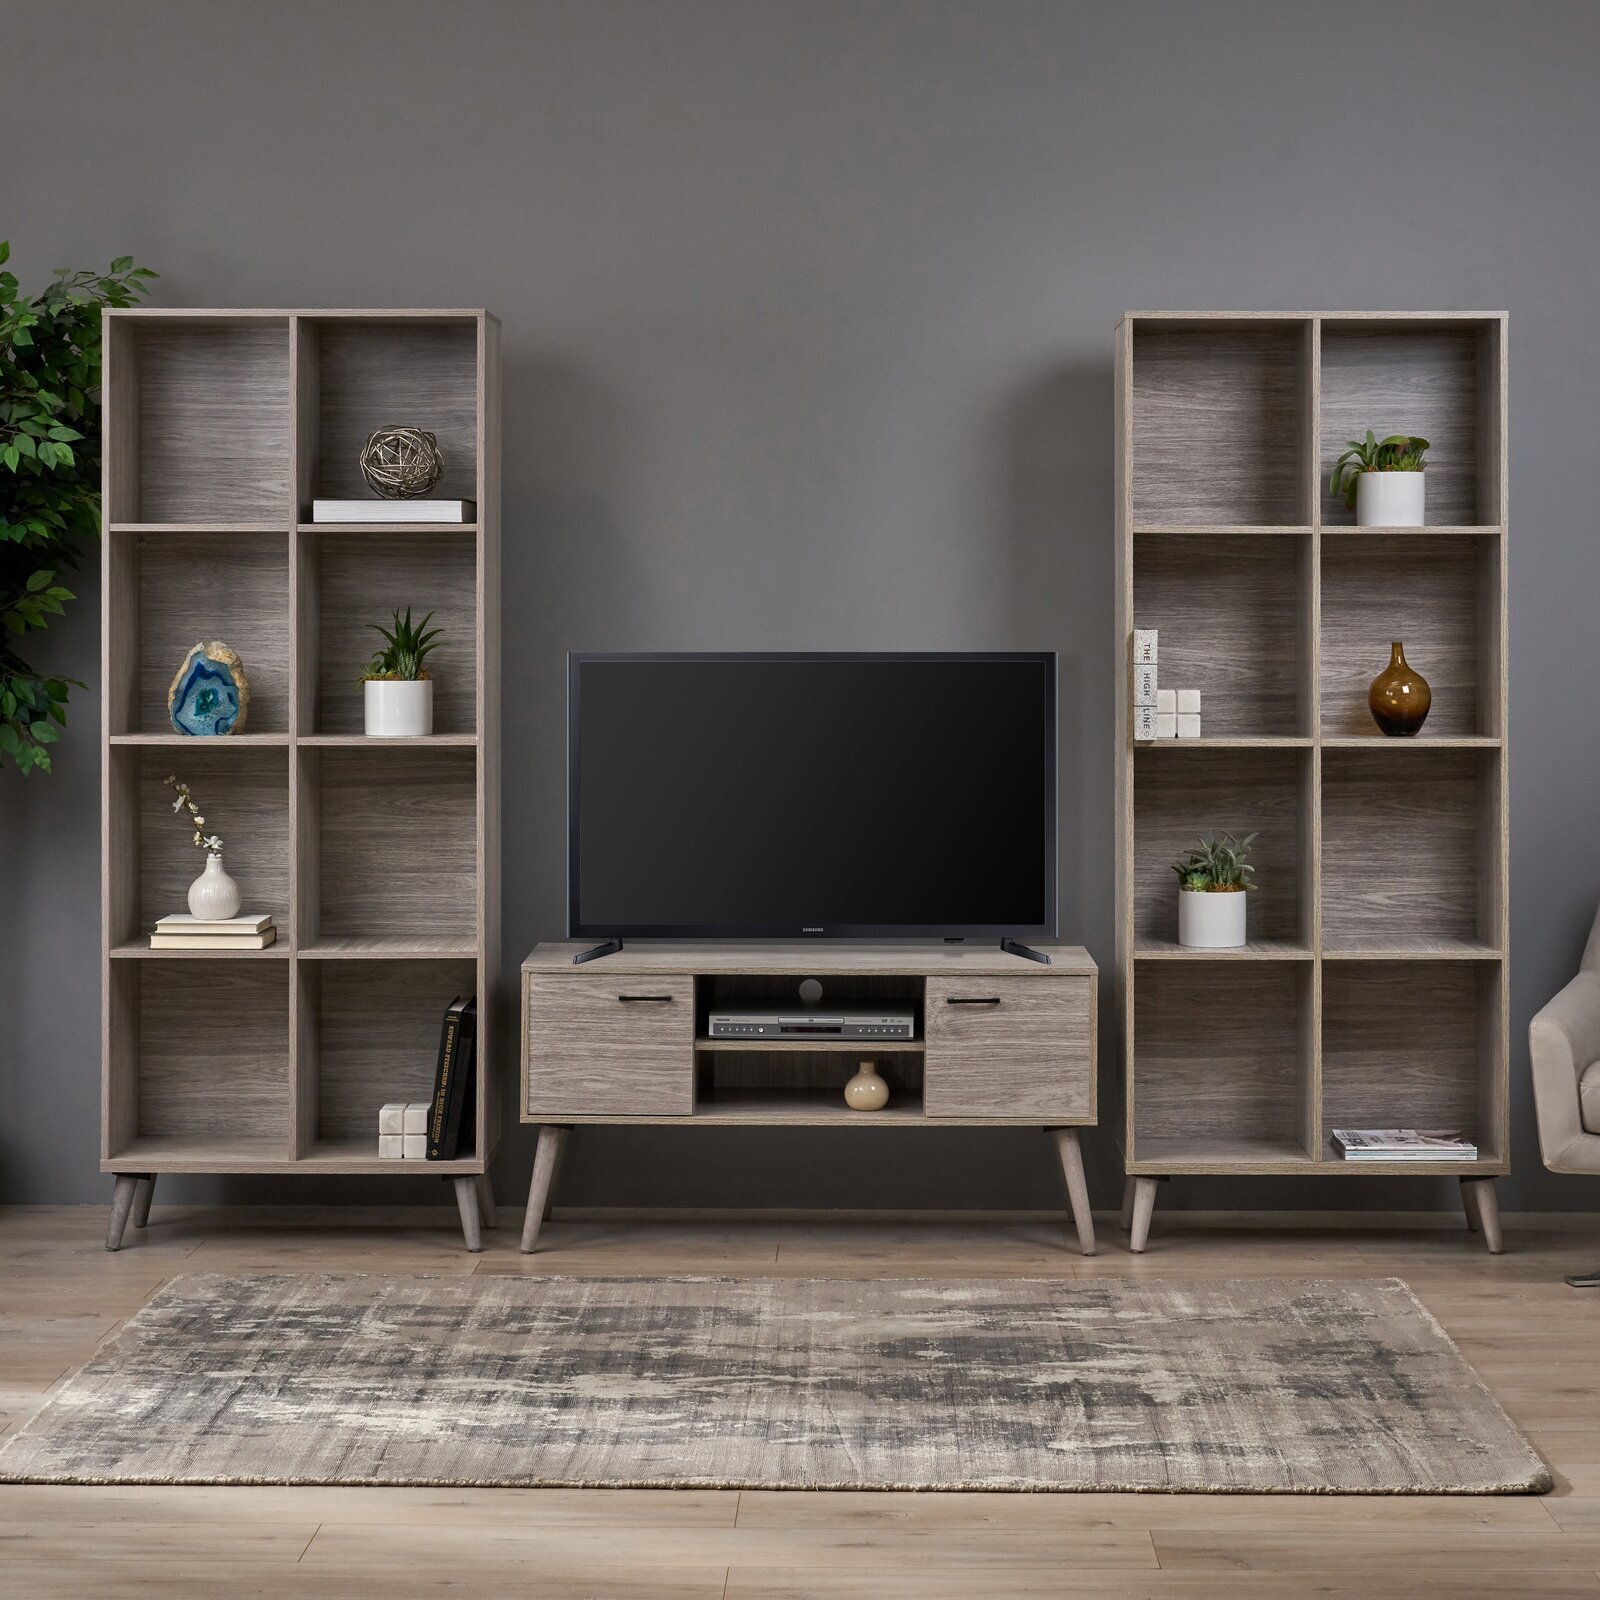 Entertainment Center and Bookshelves With Mid Century Design